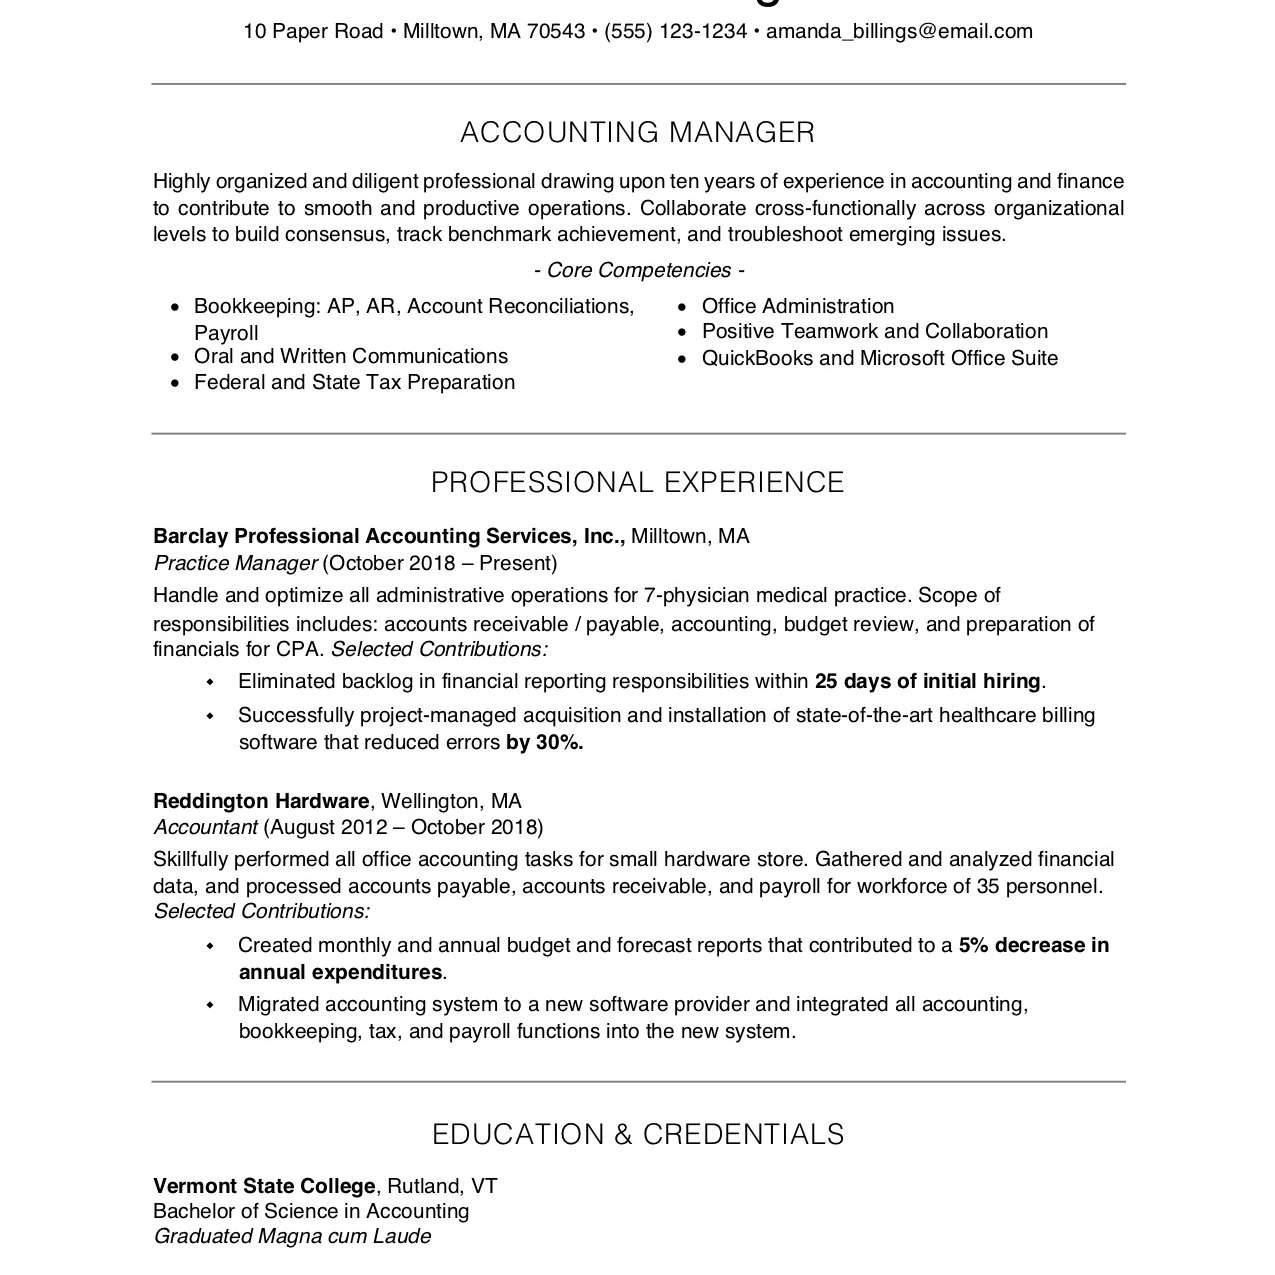 Sample Resume Template for It Professional Professional Resume Examples and Writing Tips